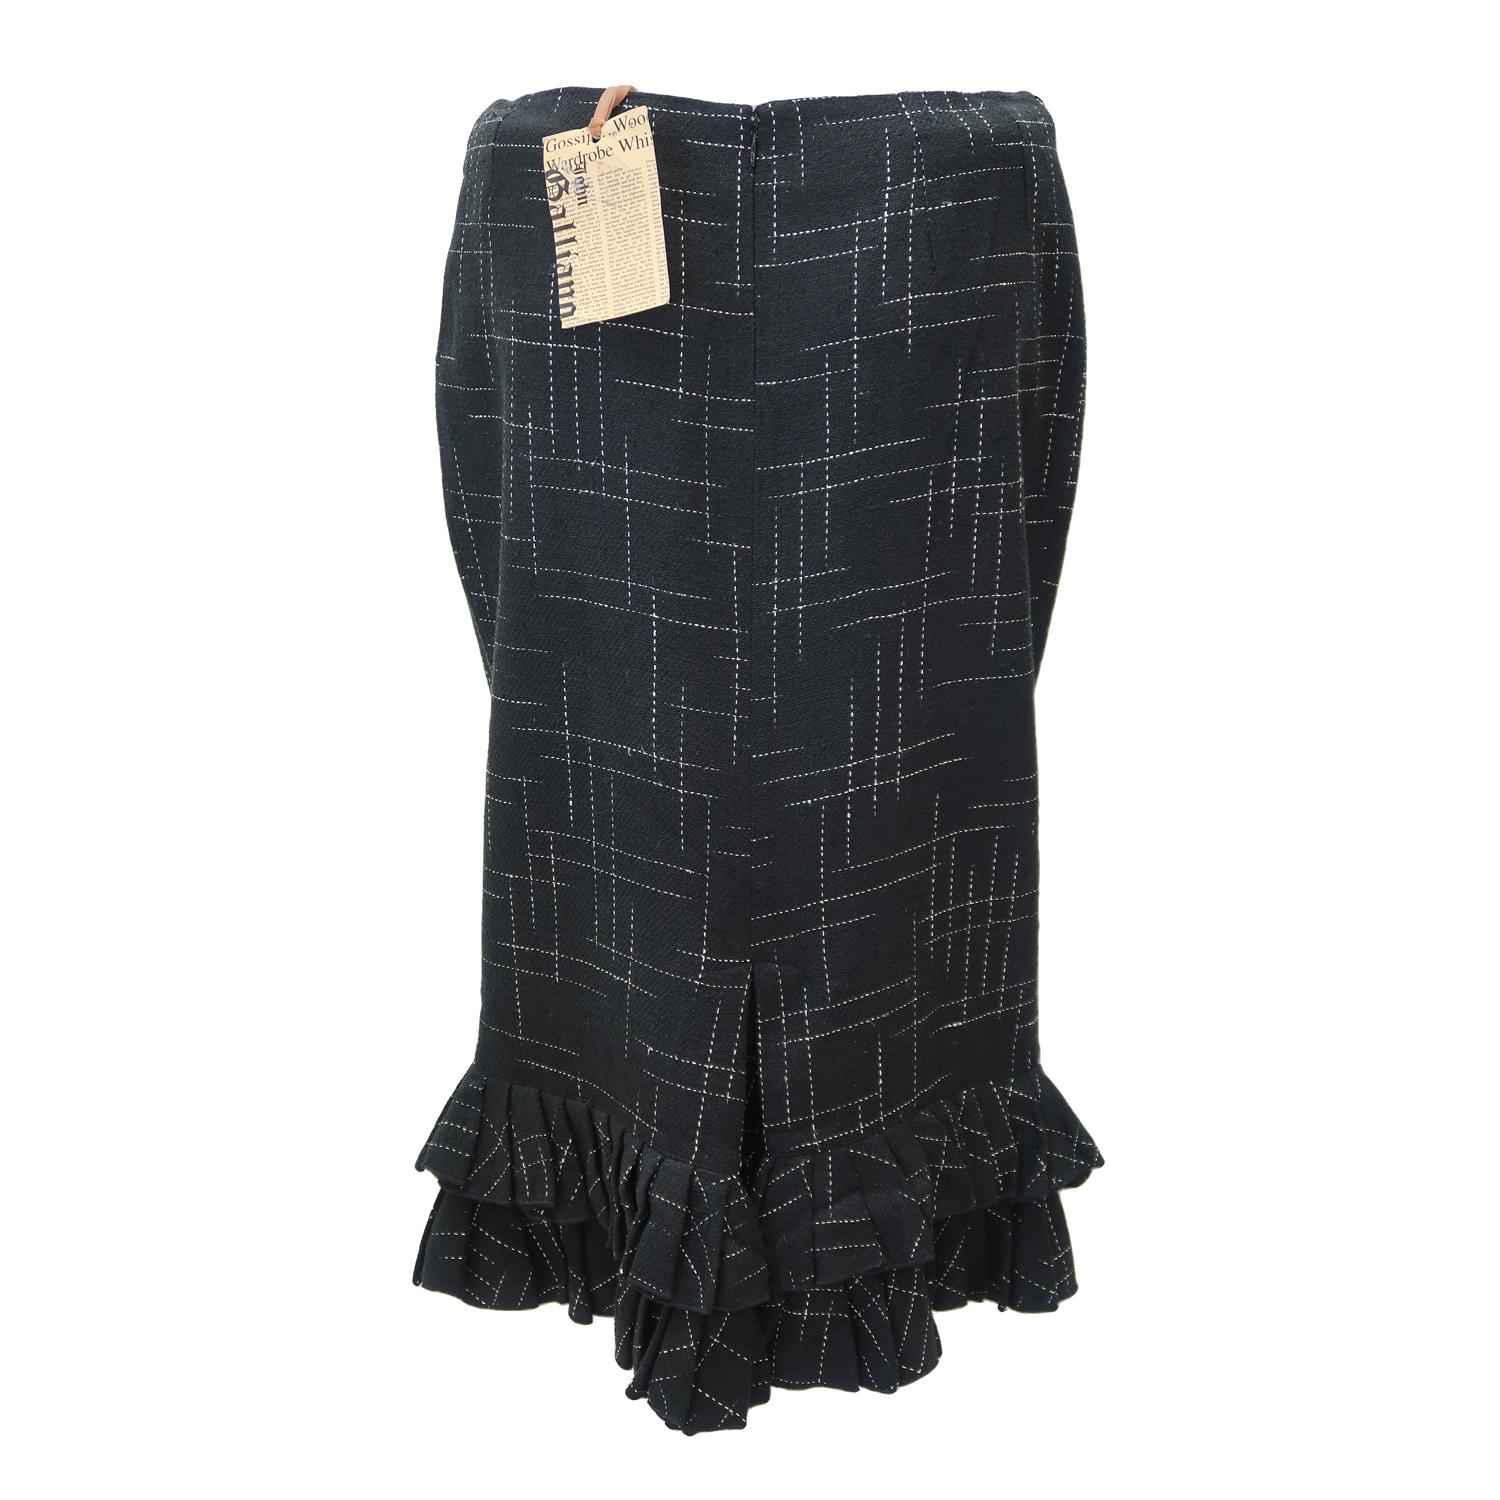 The genius of John Galliano was his ability to make even the most traditional shapes alluring and seductive, adding his own personal twist to classical dressing. This stylish knee length silk stripe motif skirt seems prim and proper, but its flirty